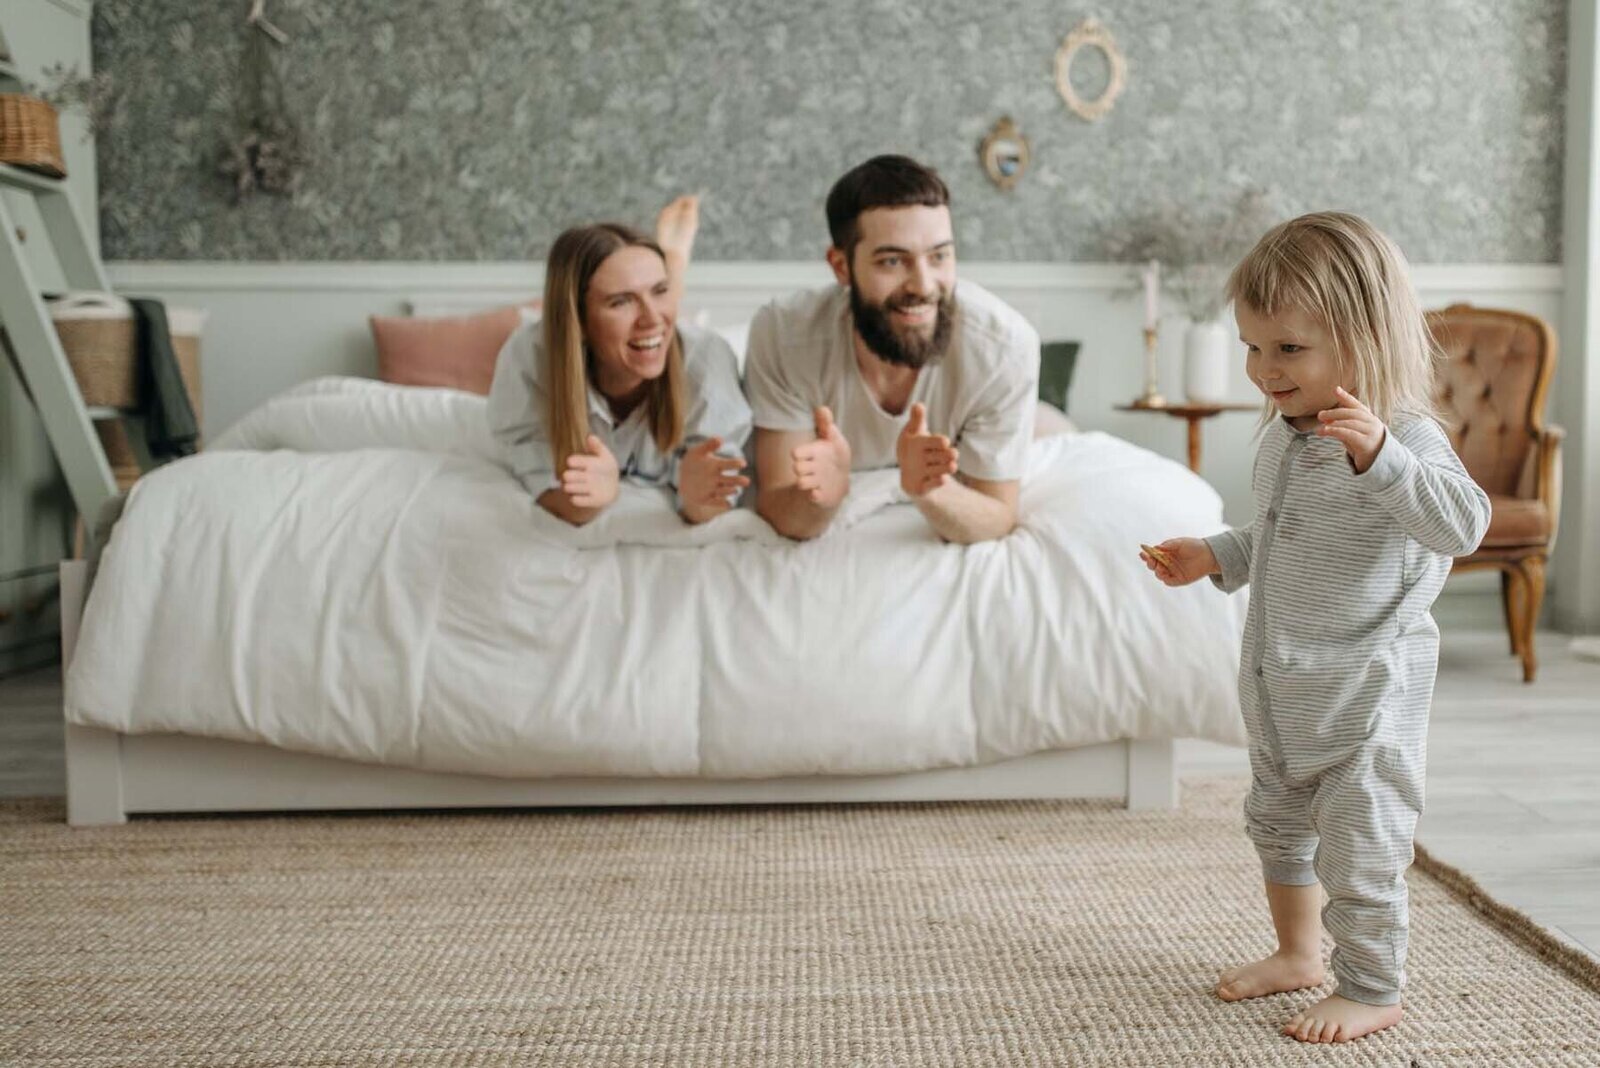 A joyful family embodying the successful application of peaceful parenting, sharing a moment of laughter and connection.